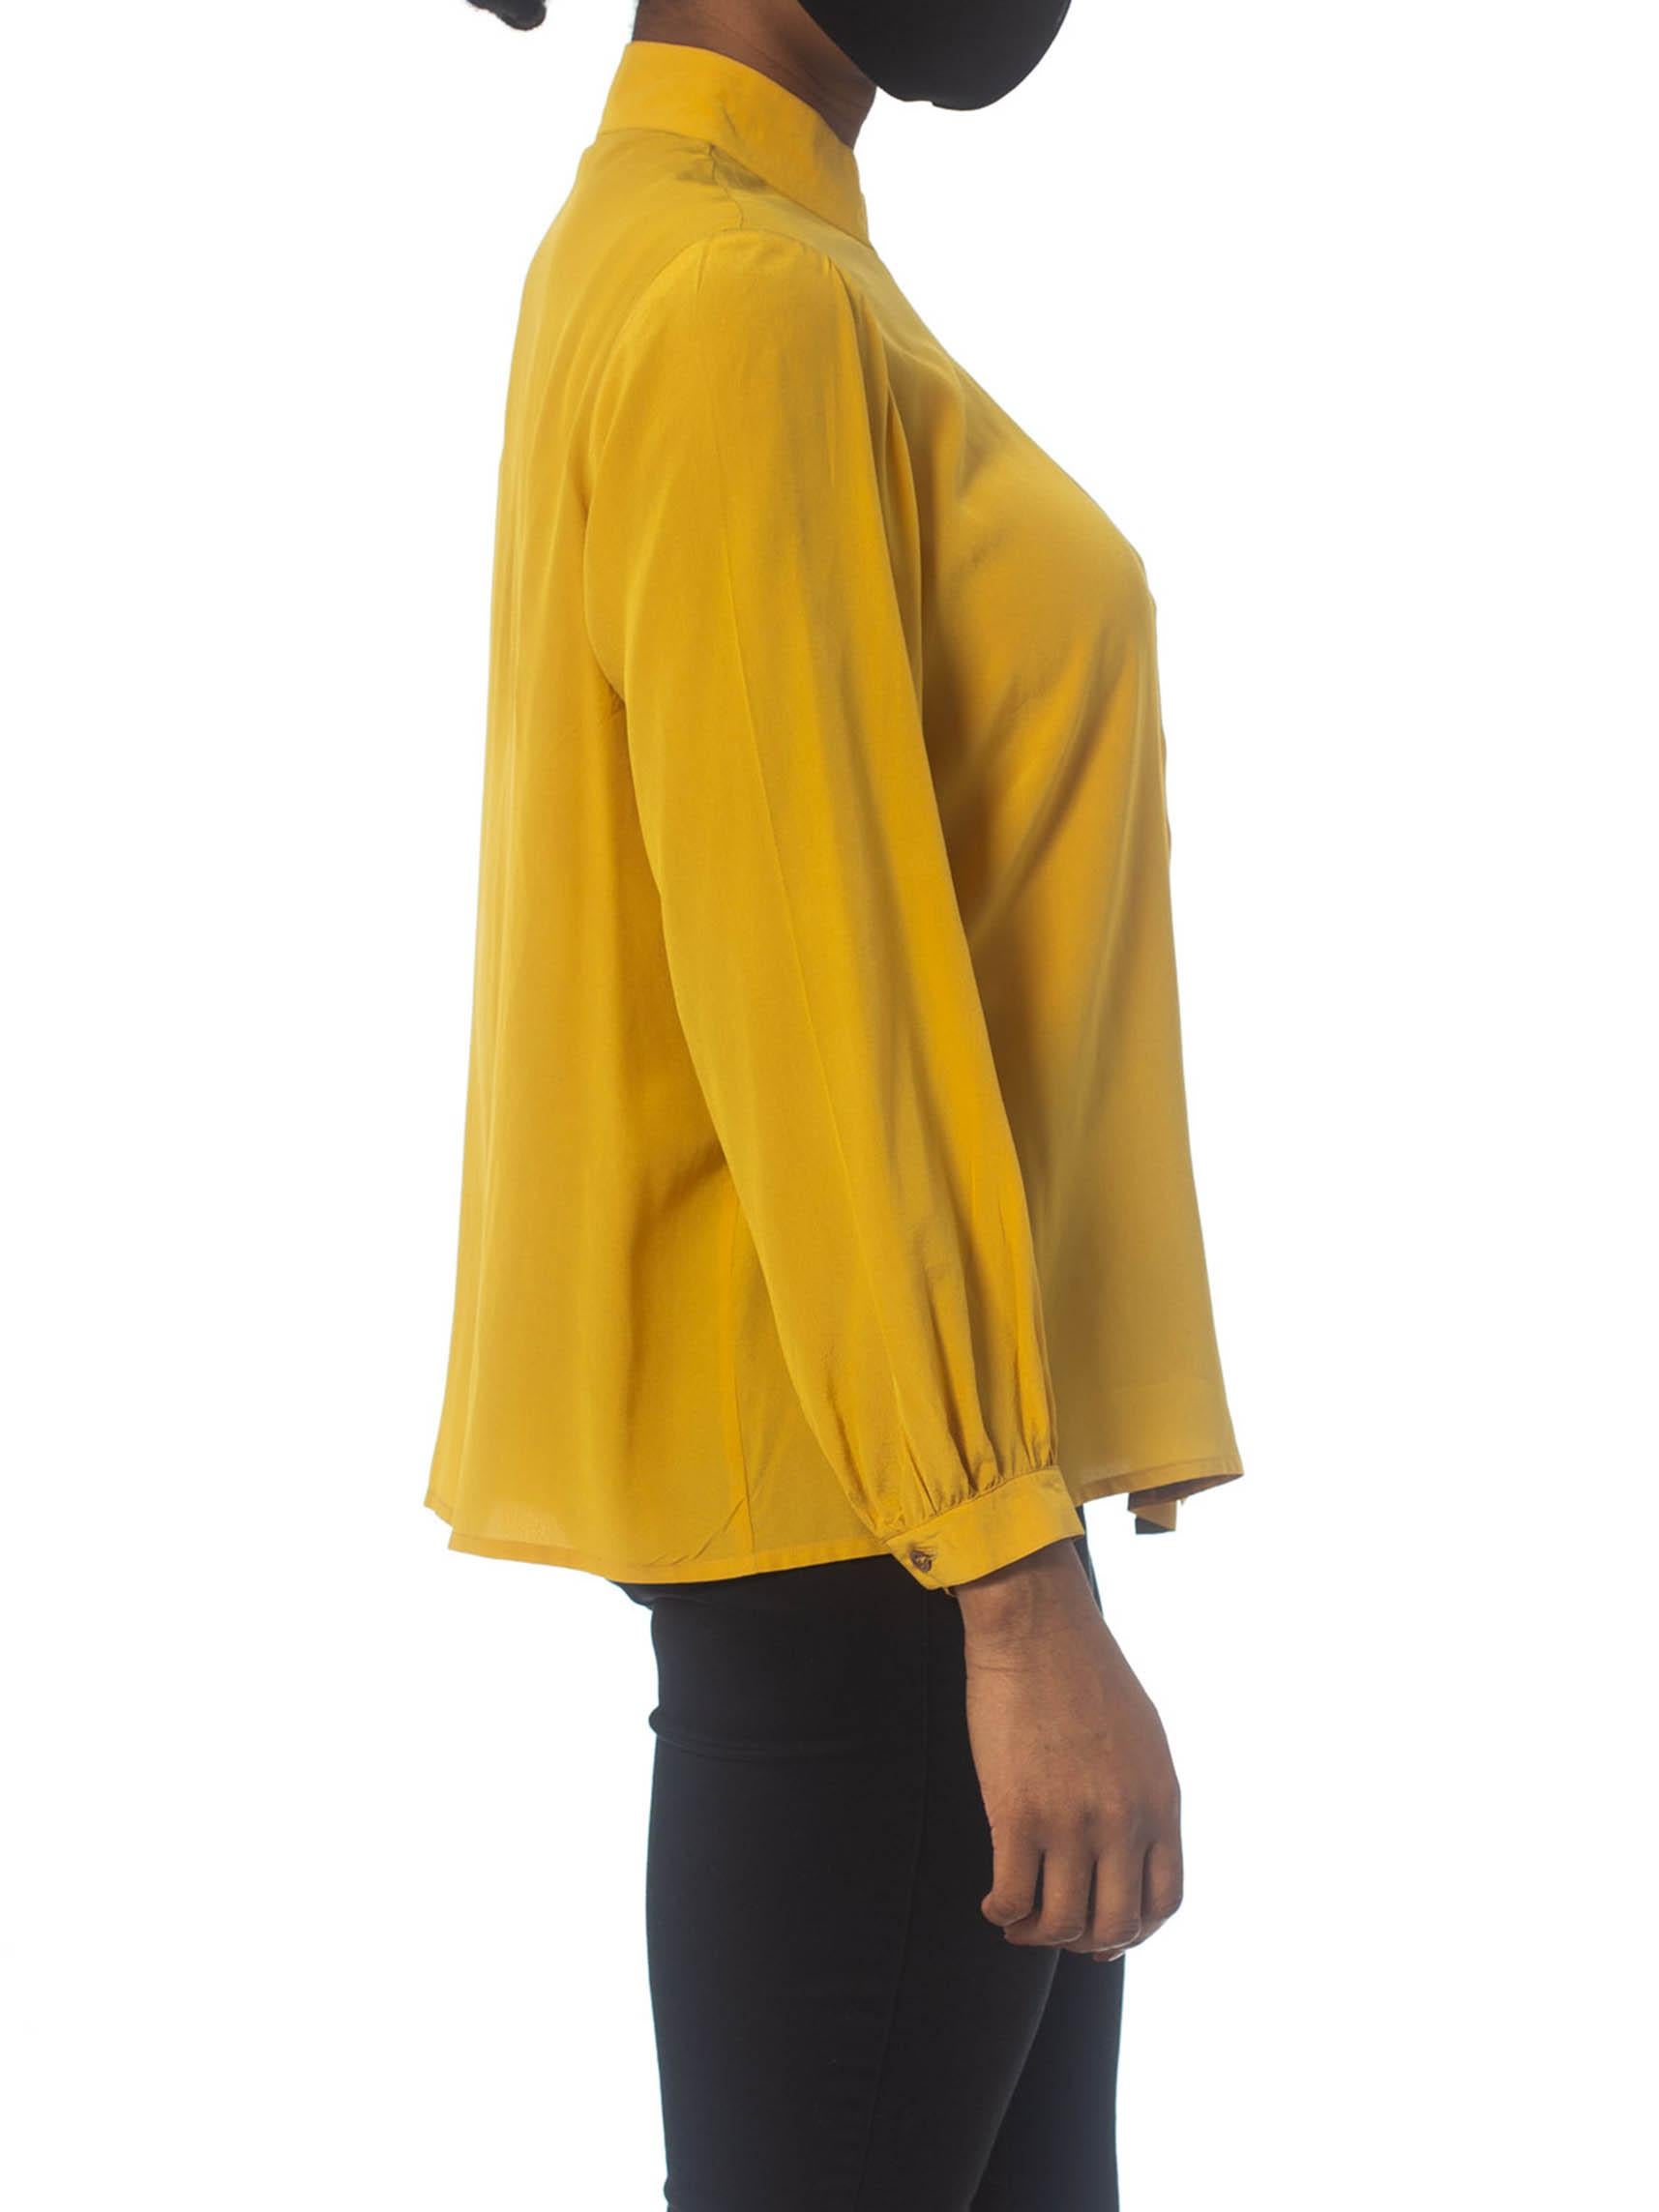 Women's 1970S Yellow Ochre Silk Pleated Front Blouse Made In Italy With Hand Finishing